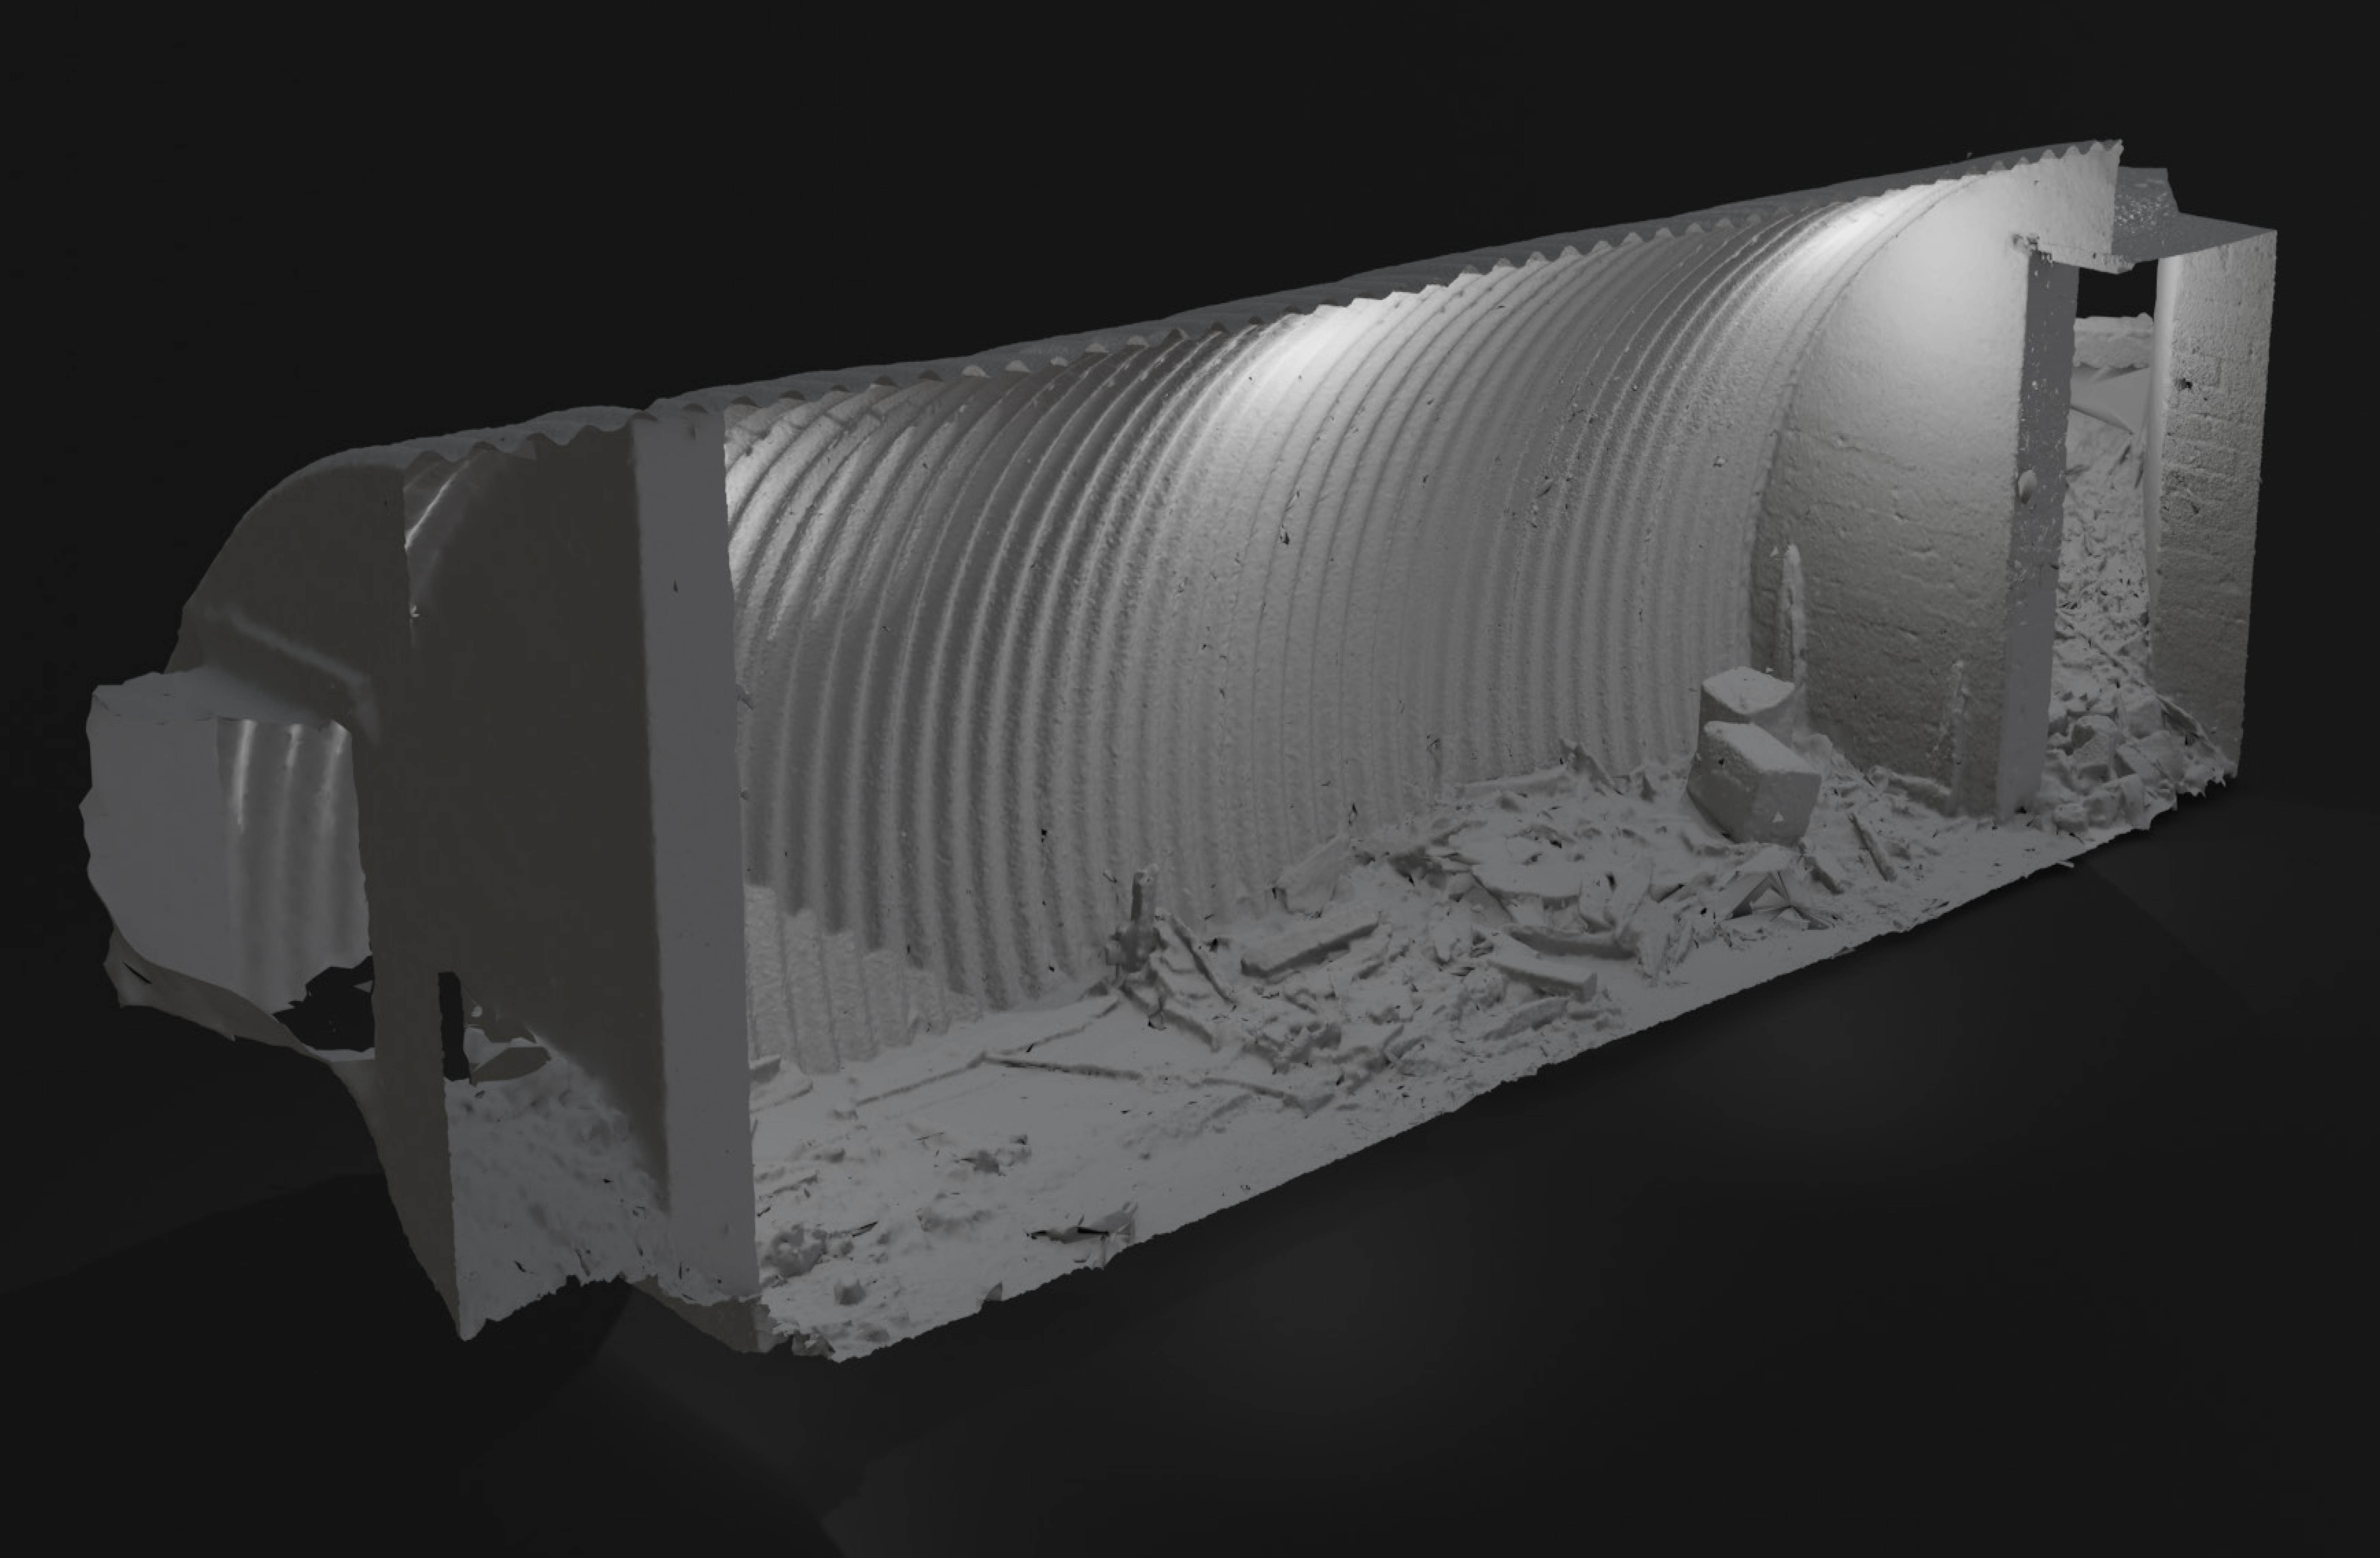 The bunker shown in a computer reconstruction, from a side elevation